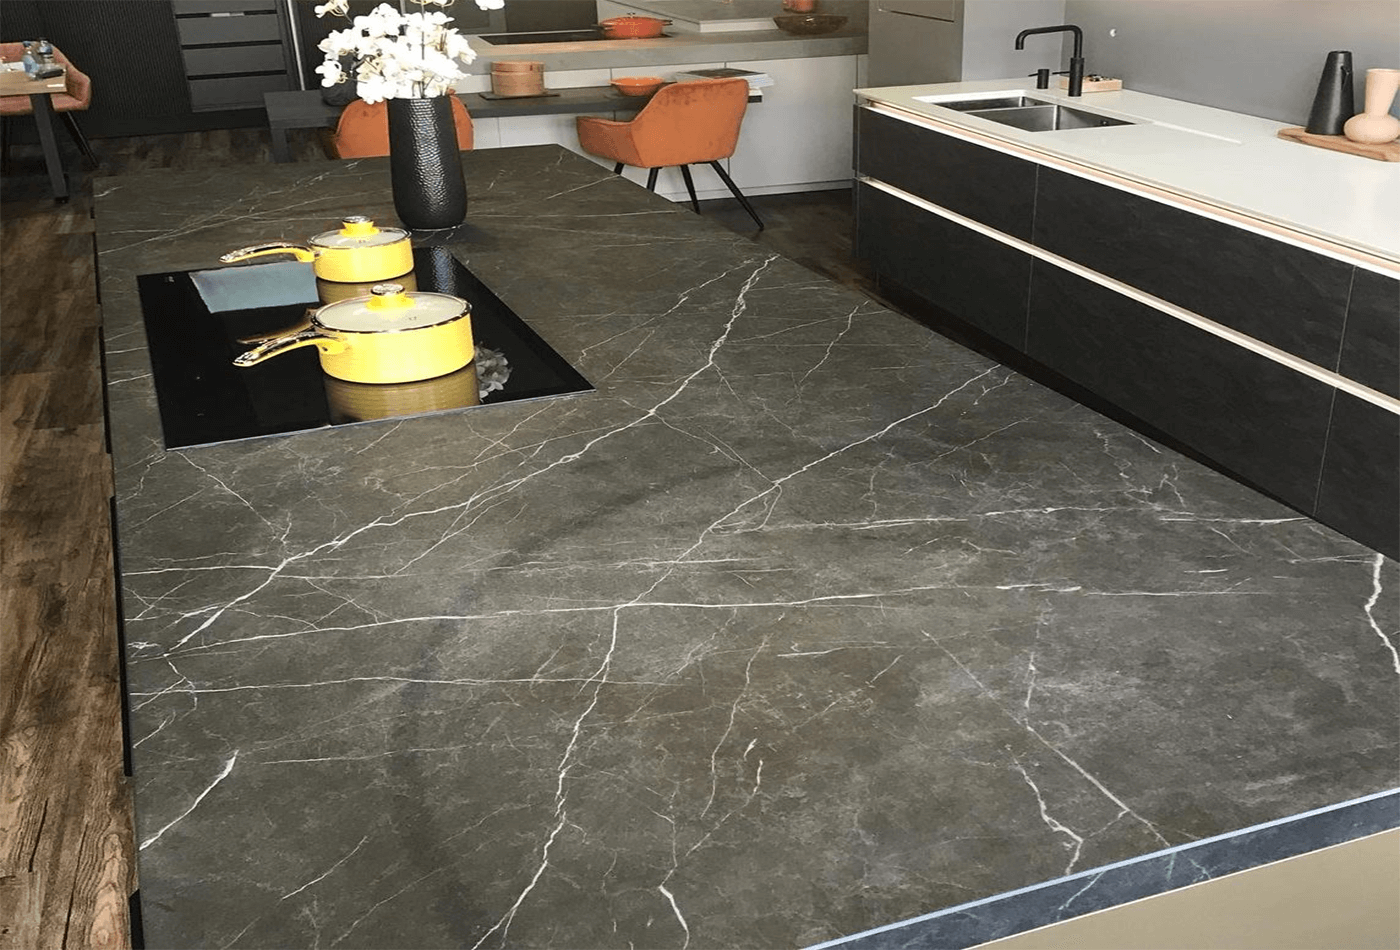 Porcelain Surfaces are High Traffic Areas…Is it